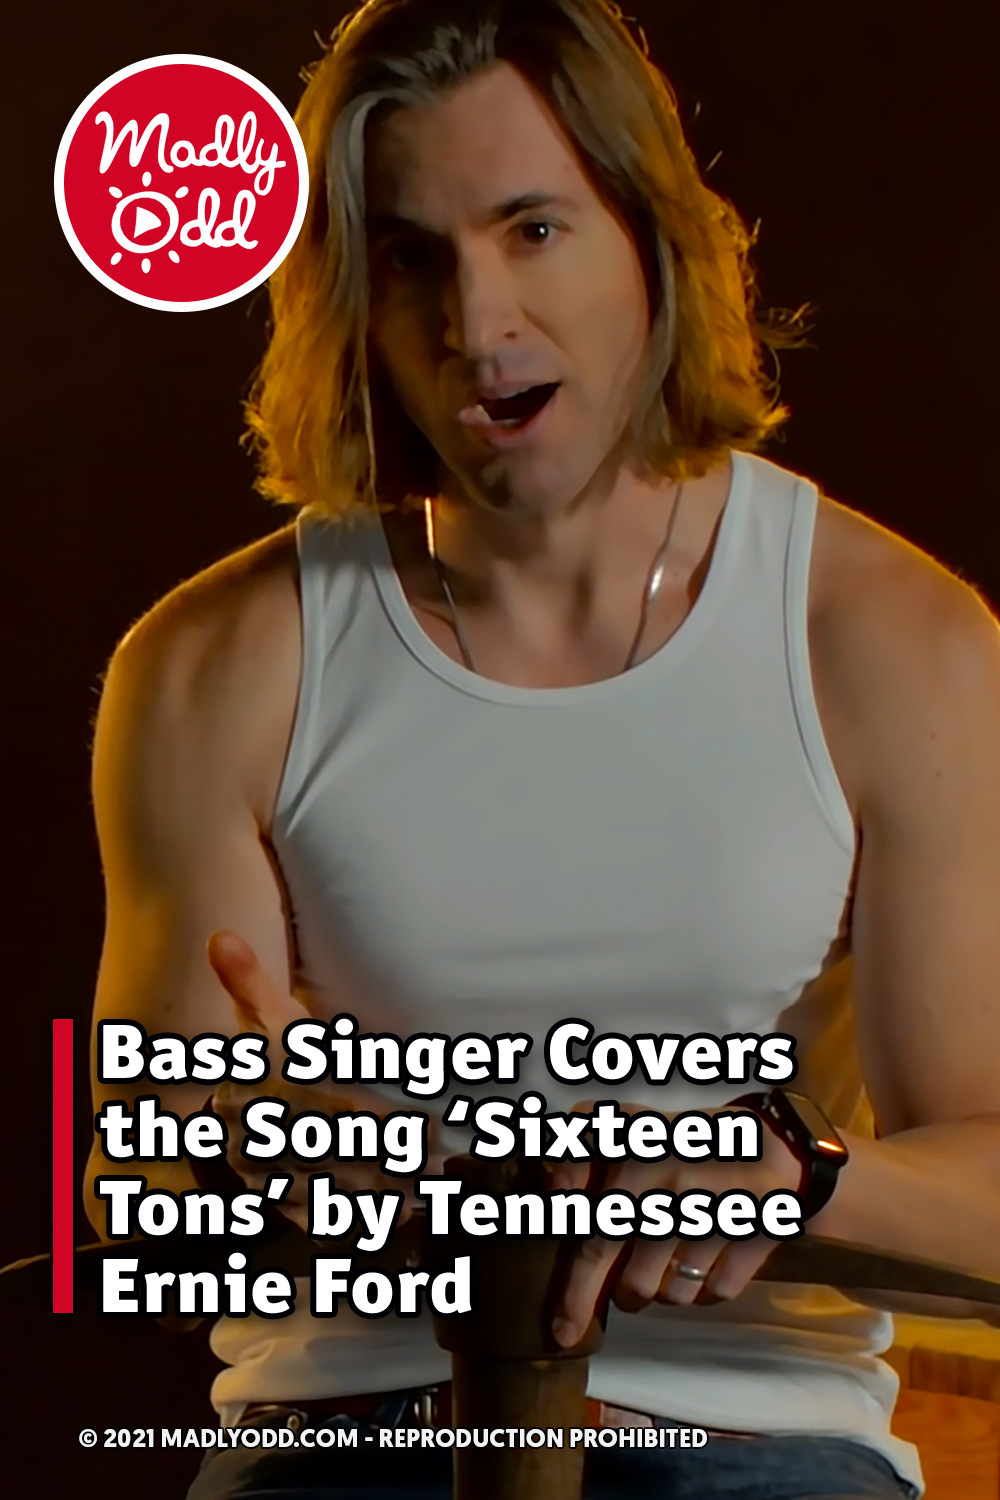 Bass Singer Covers the Song ‘Sixteen Tons’ by Tennessee Ernie Ford